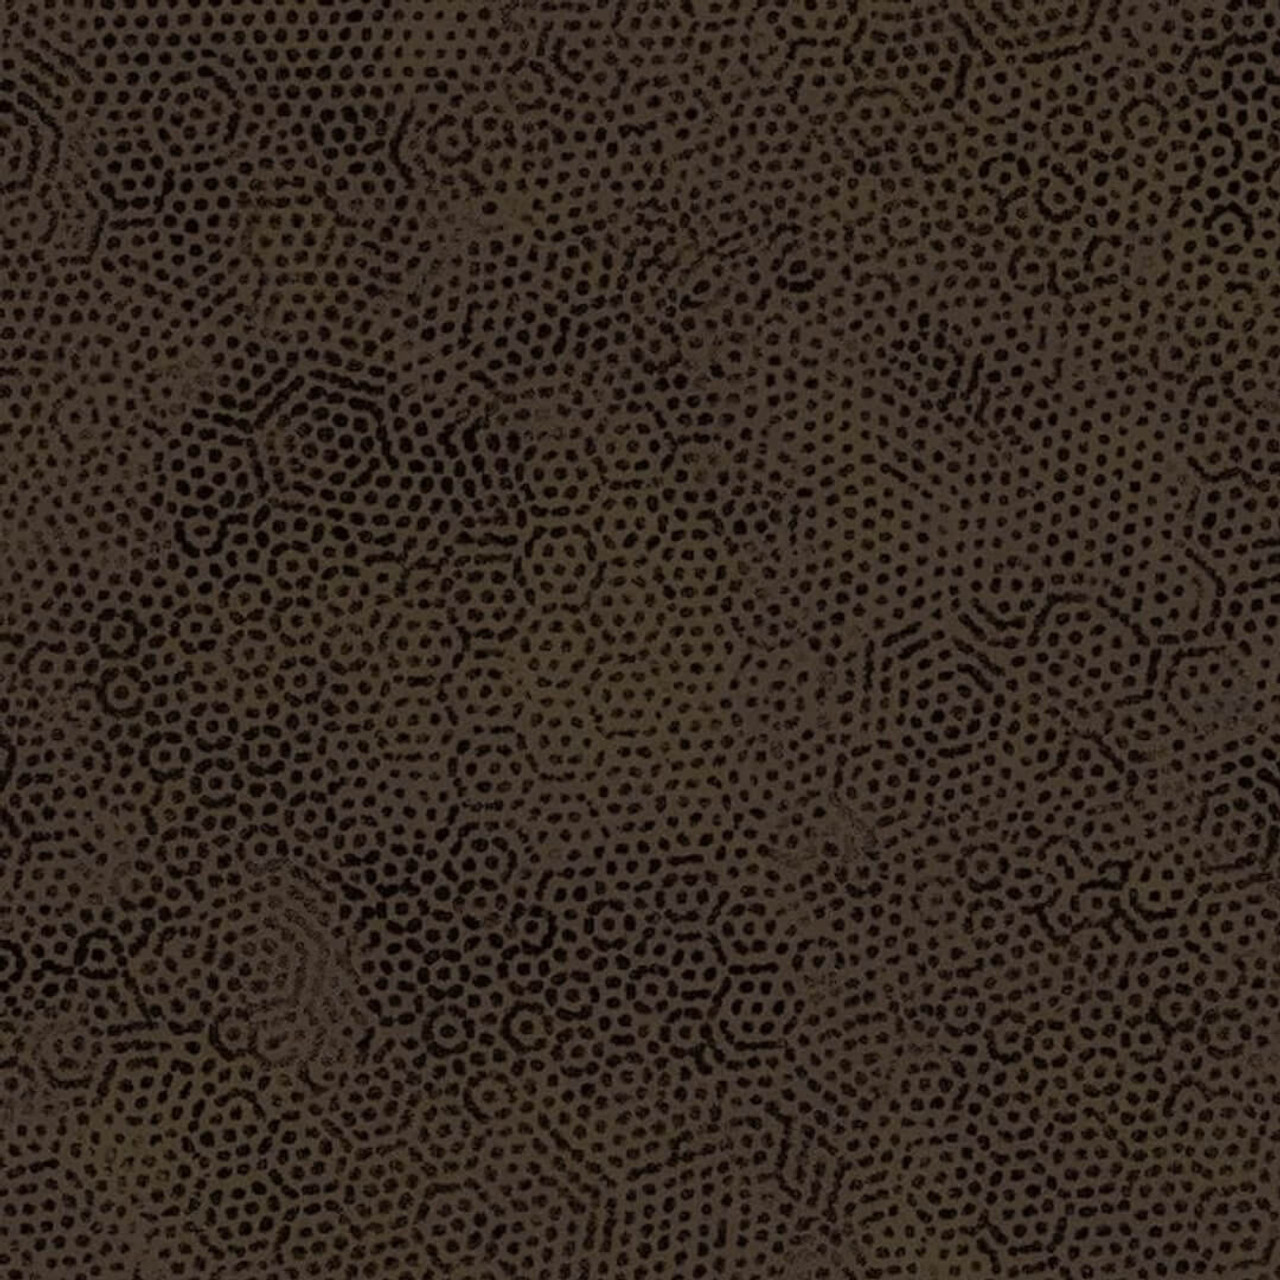 Close-up of Andover Fabrics Dimples Collection Peat Moss quilting fabric with tonal texture.